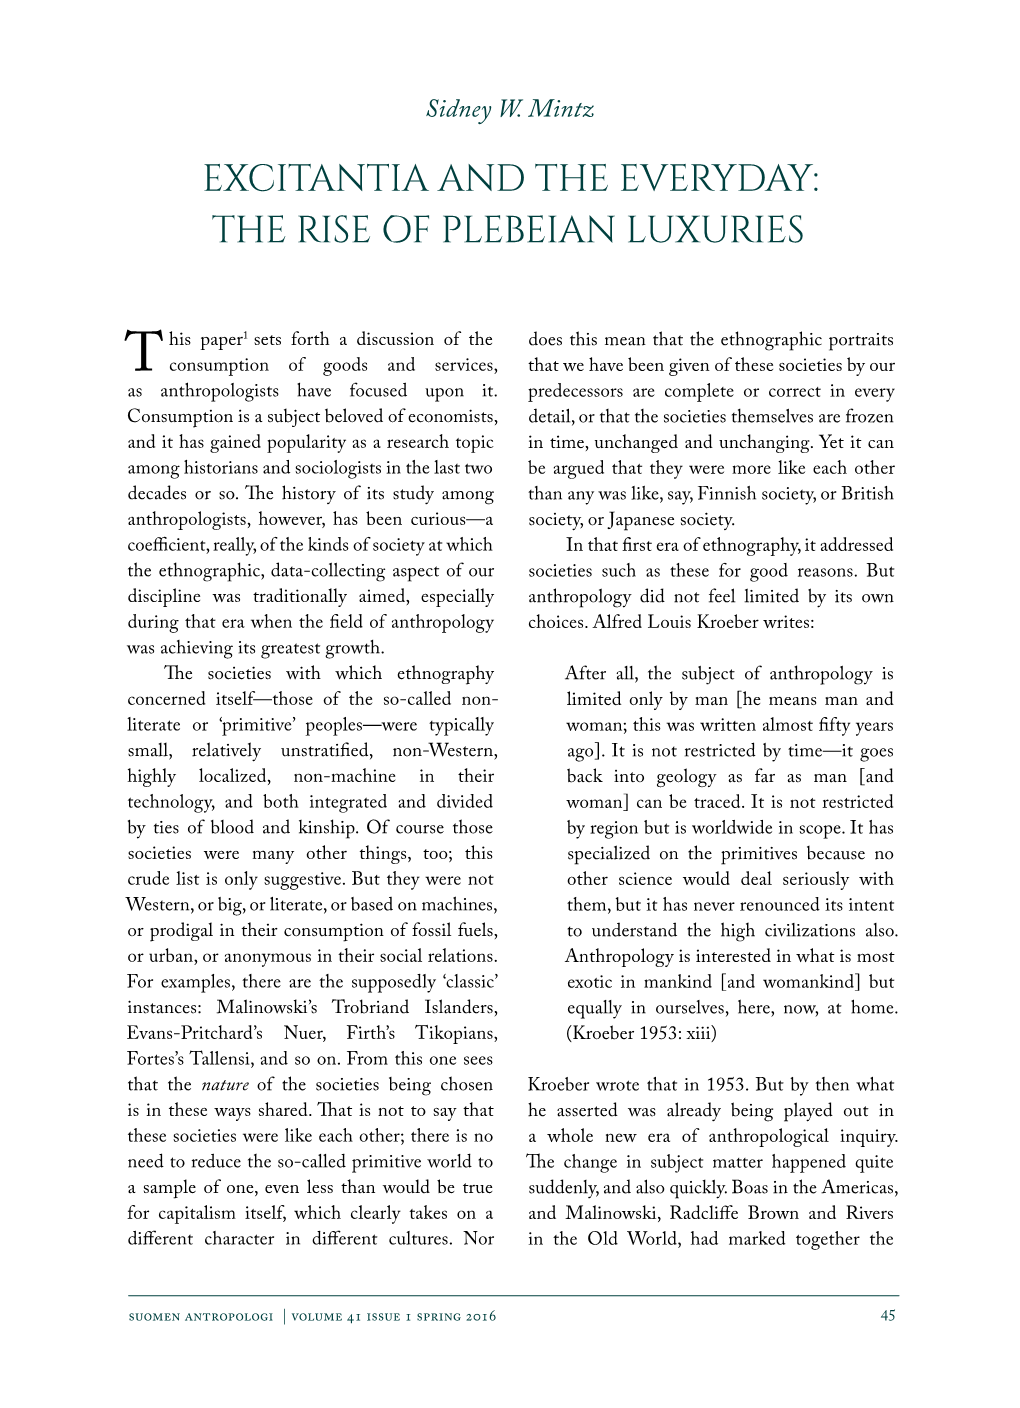 Excitantia and the Everyday: the Rise of Plebeian Luxuries